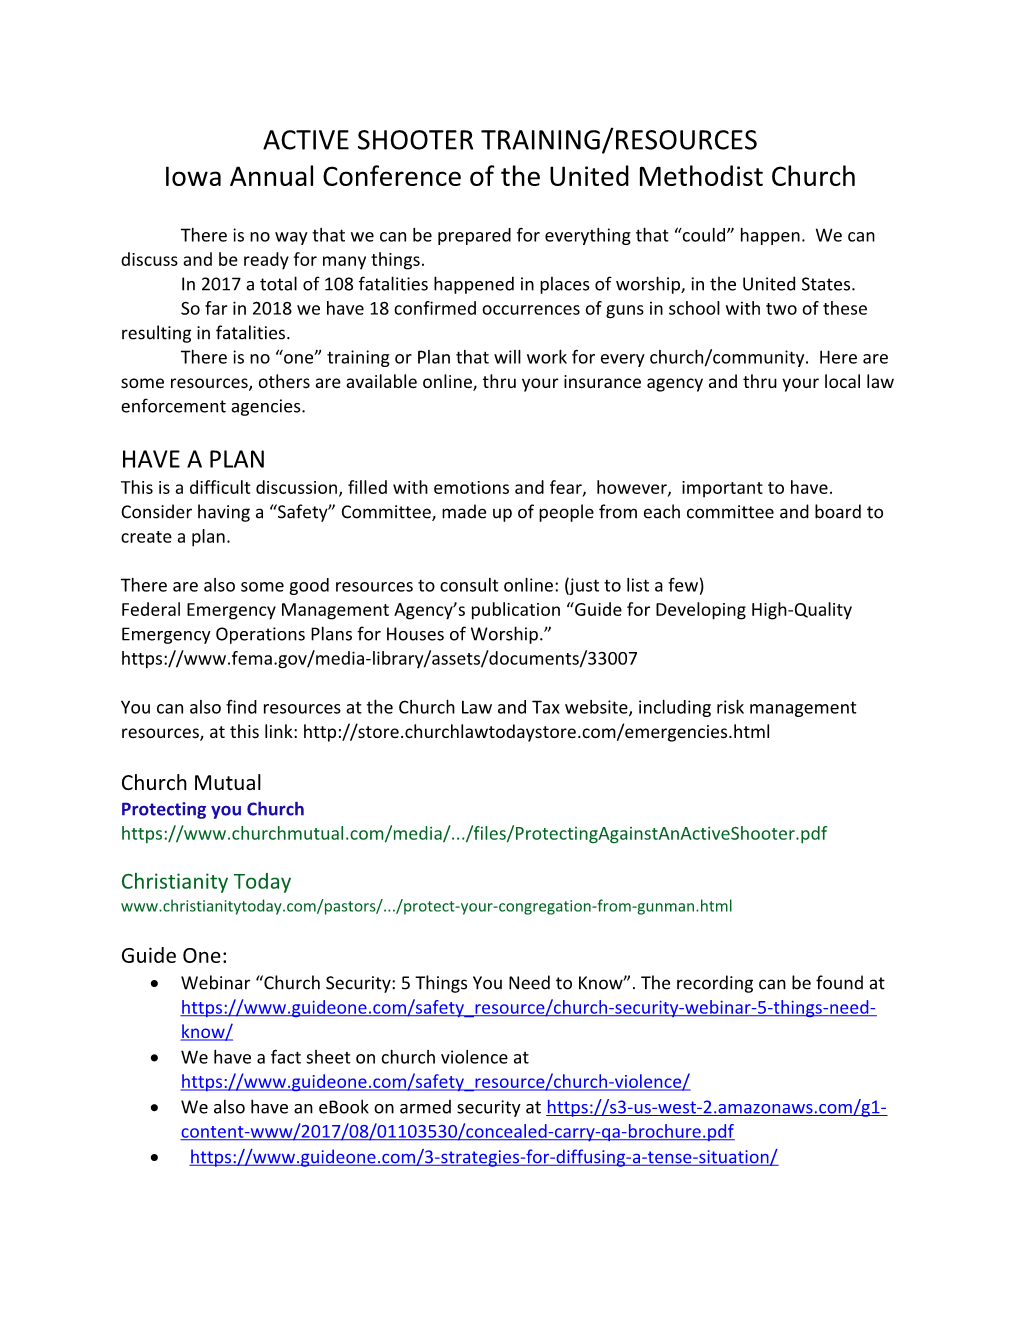 Iowa Annual Conference of the United Methodist Church